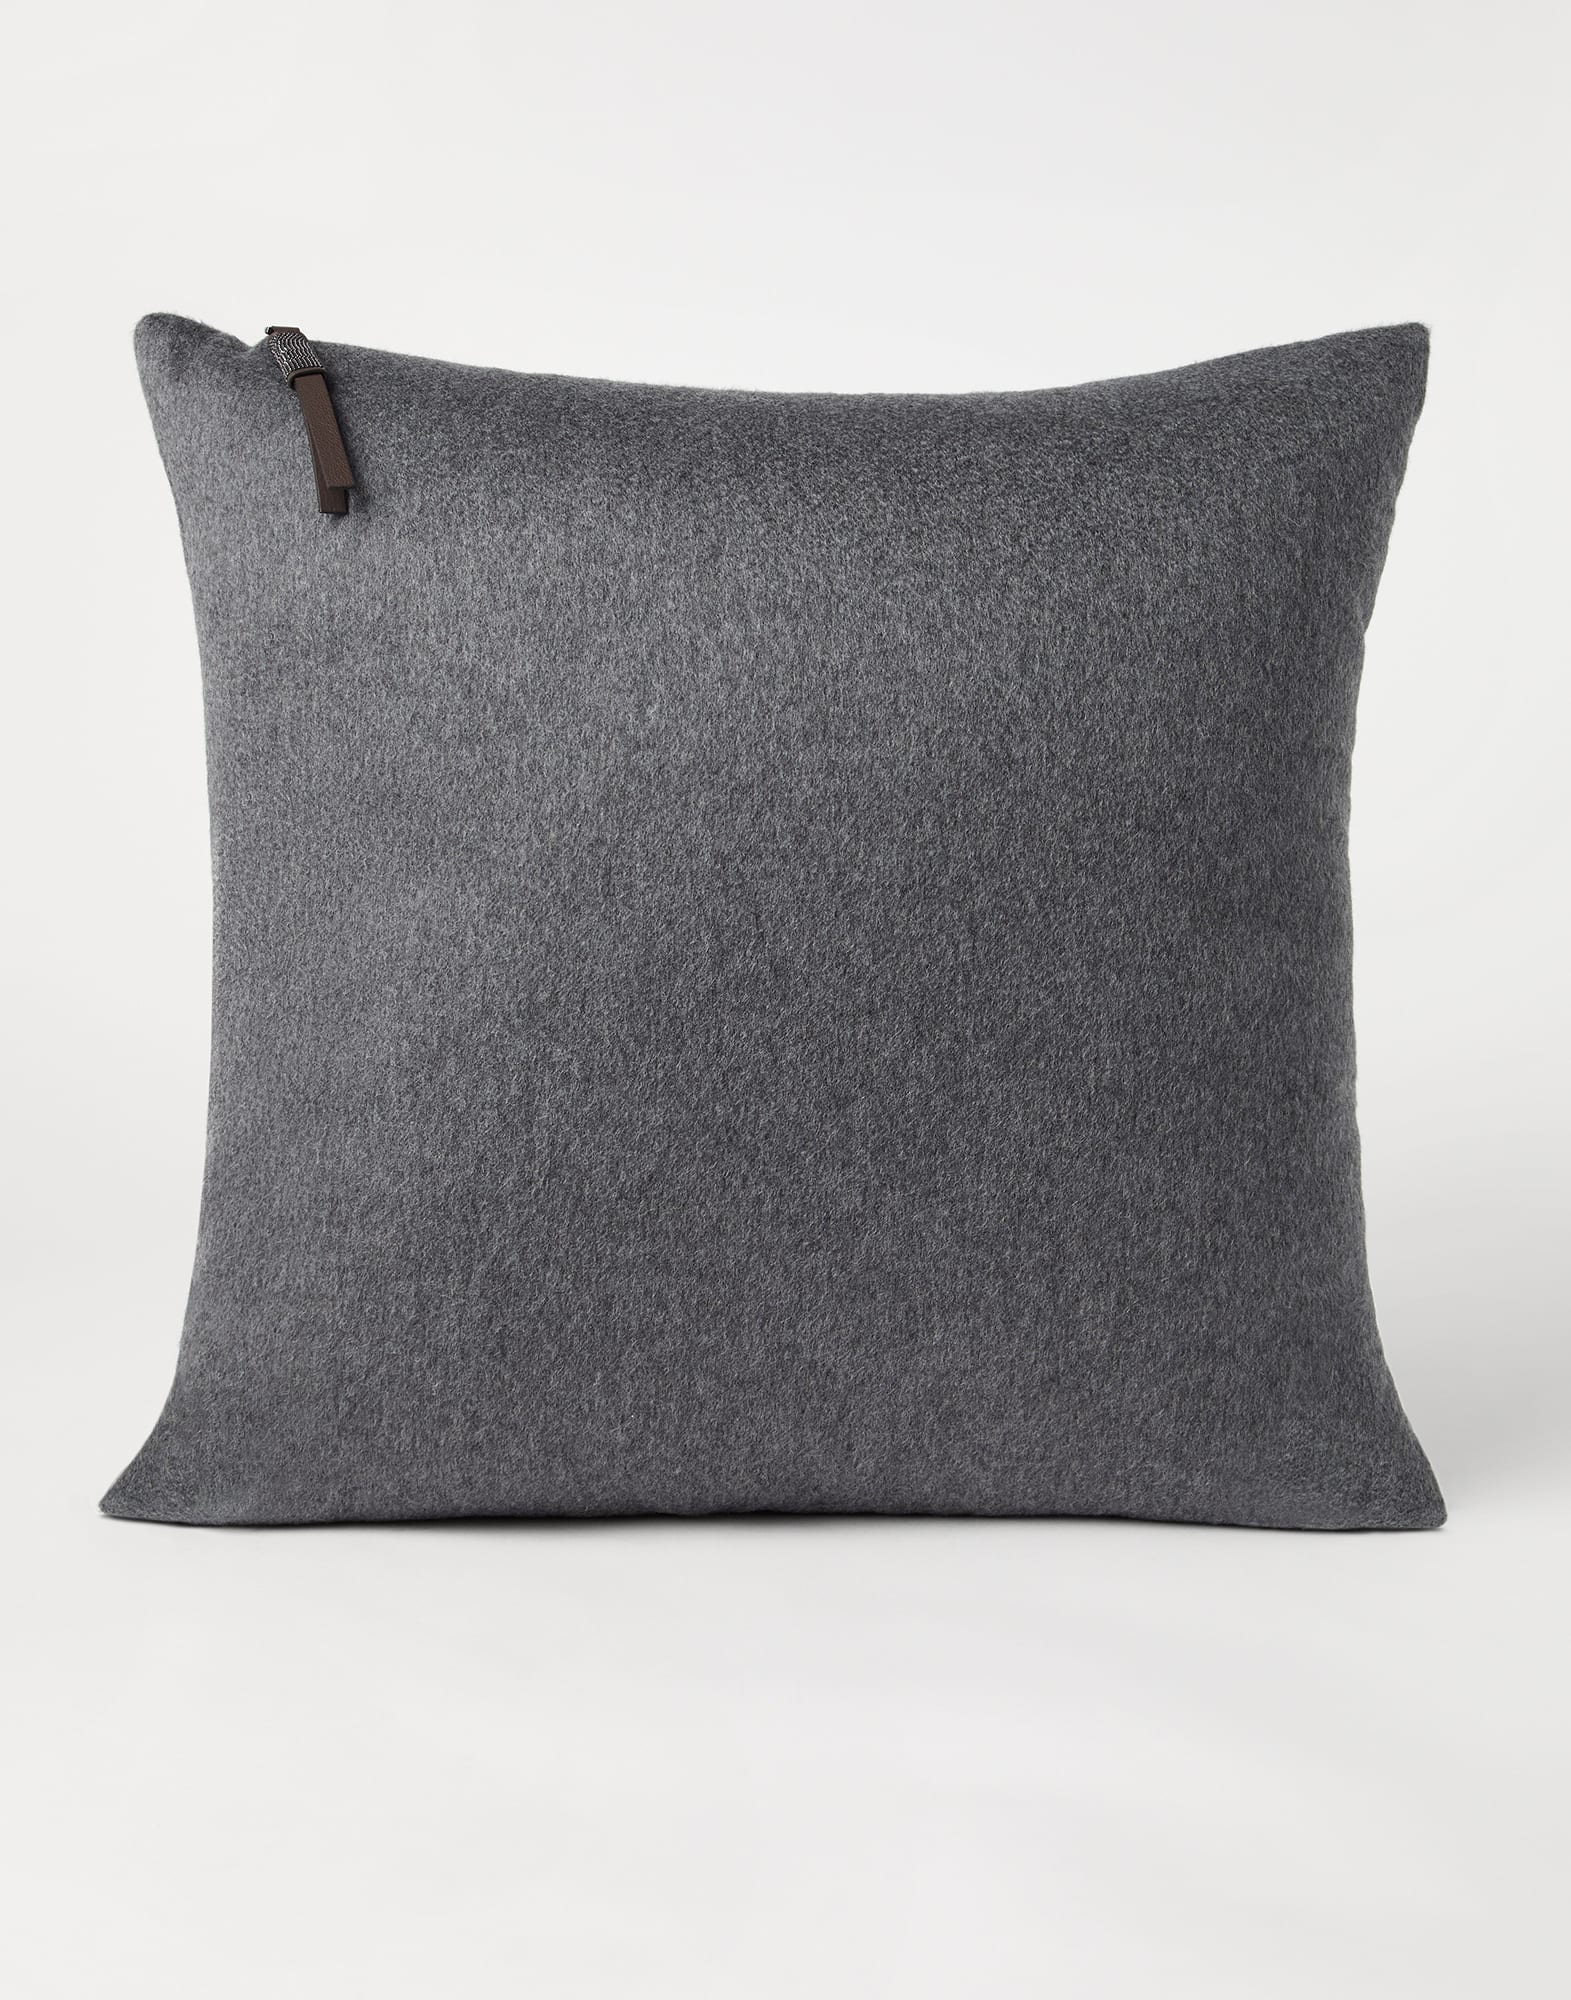 Fabric Cushions - Front view